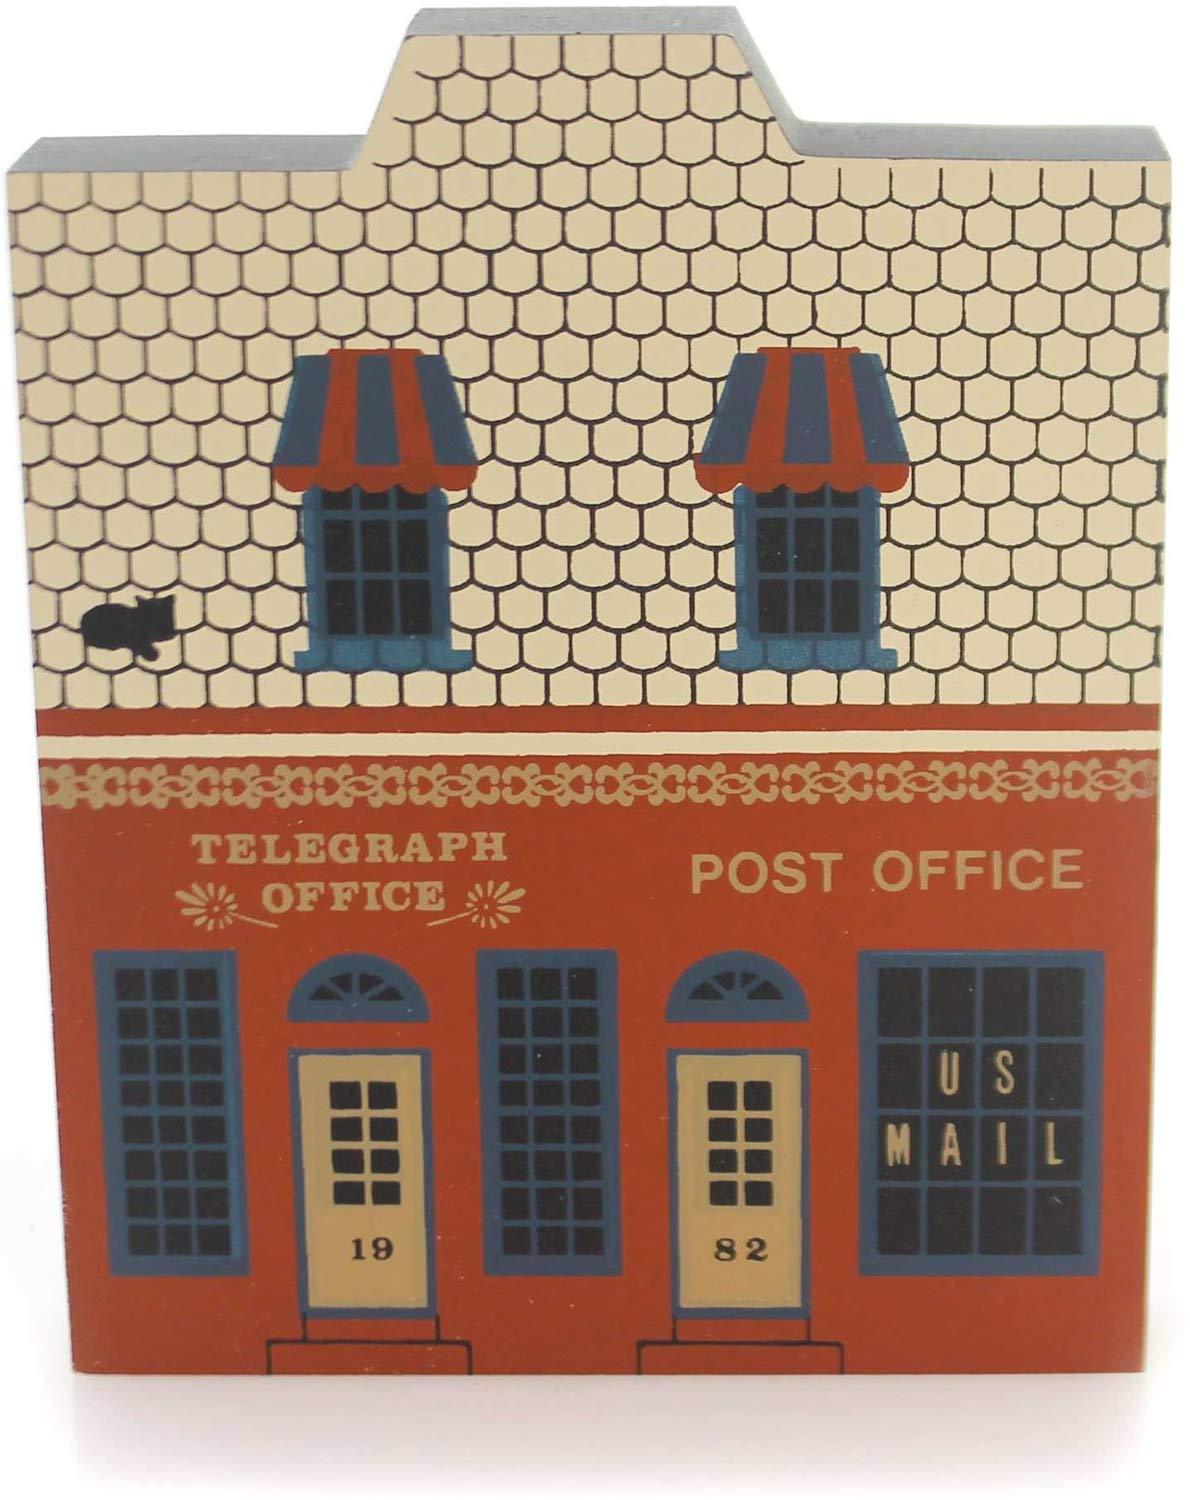 CATS MEOW VILLAGE Telegraph Post Office Retired 1987 Main Street Series 1874 - $16.95